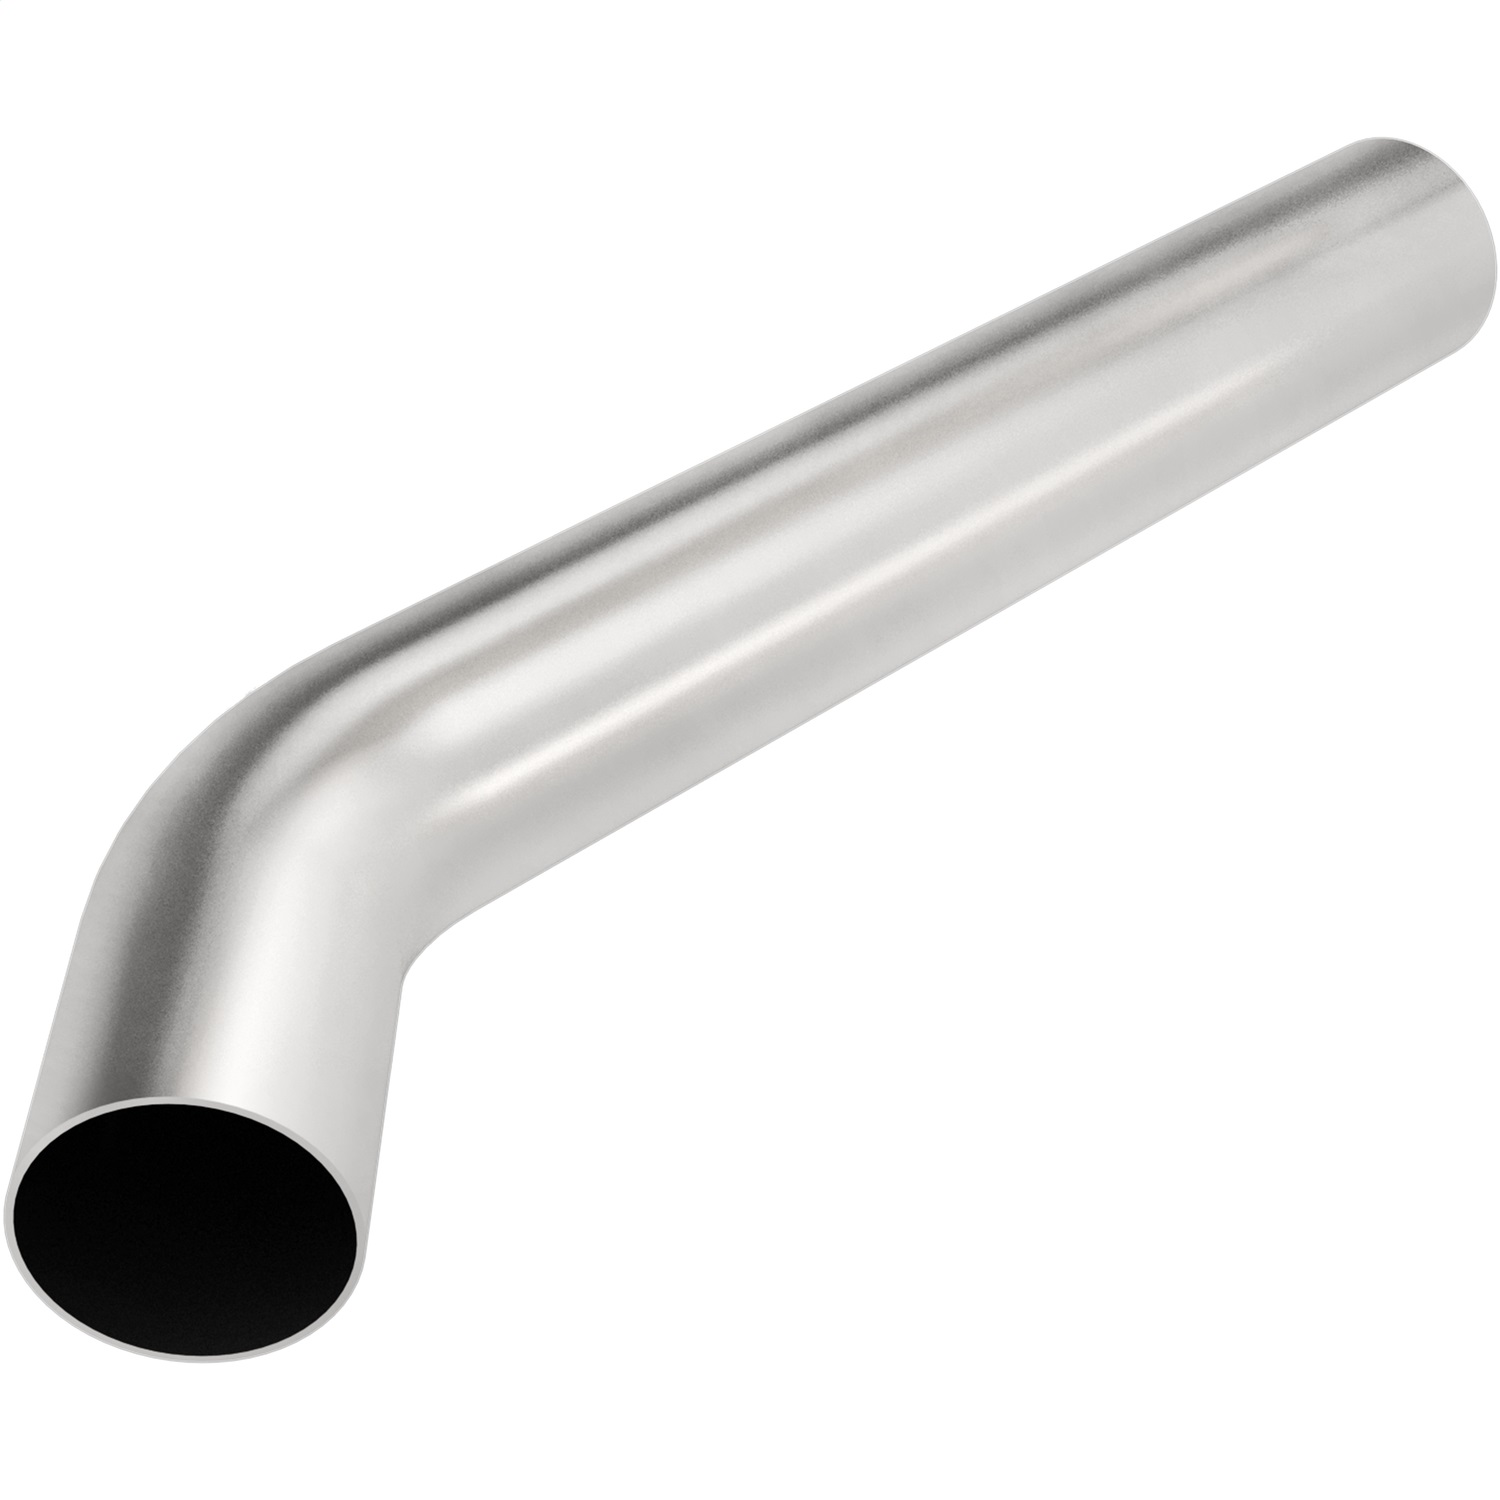 Magnaflow Performance Exhaust Magnaflow Performance Exhaust 10736 Smooth Transitions Exhaust Pipe